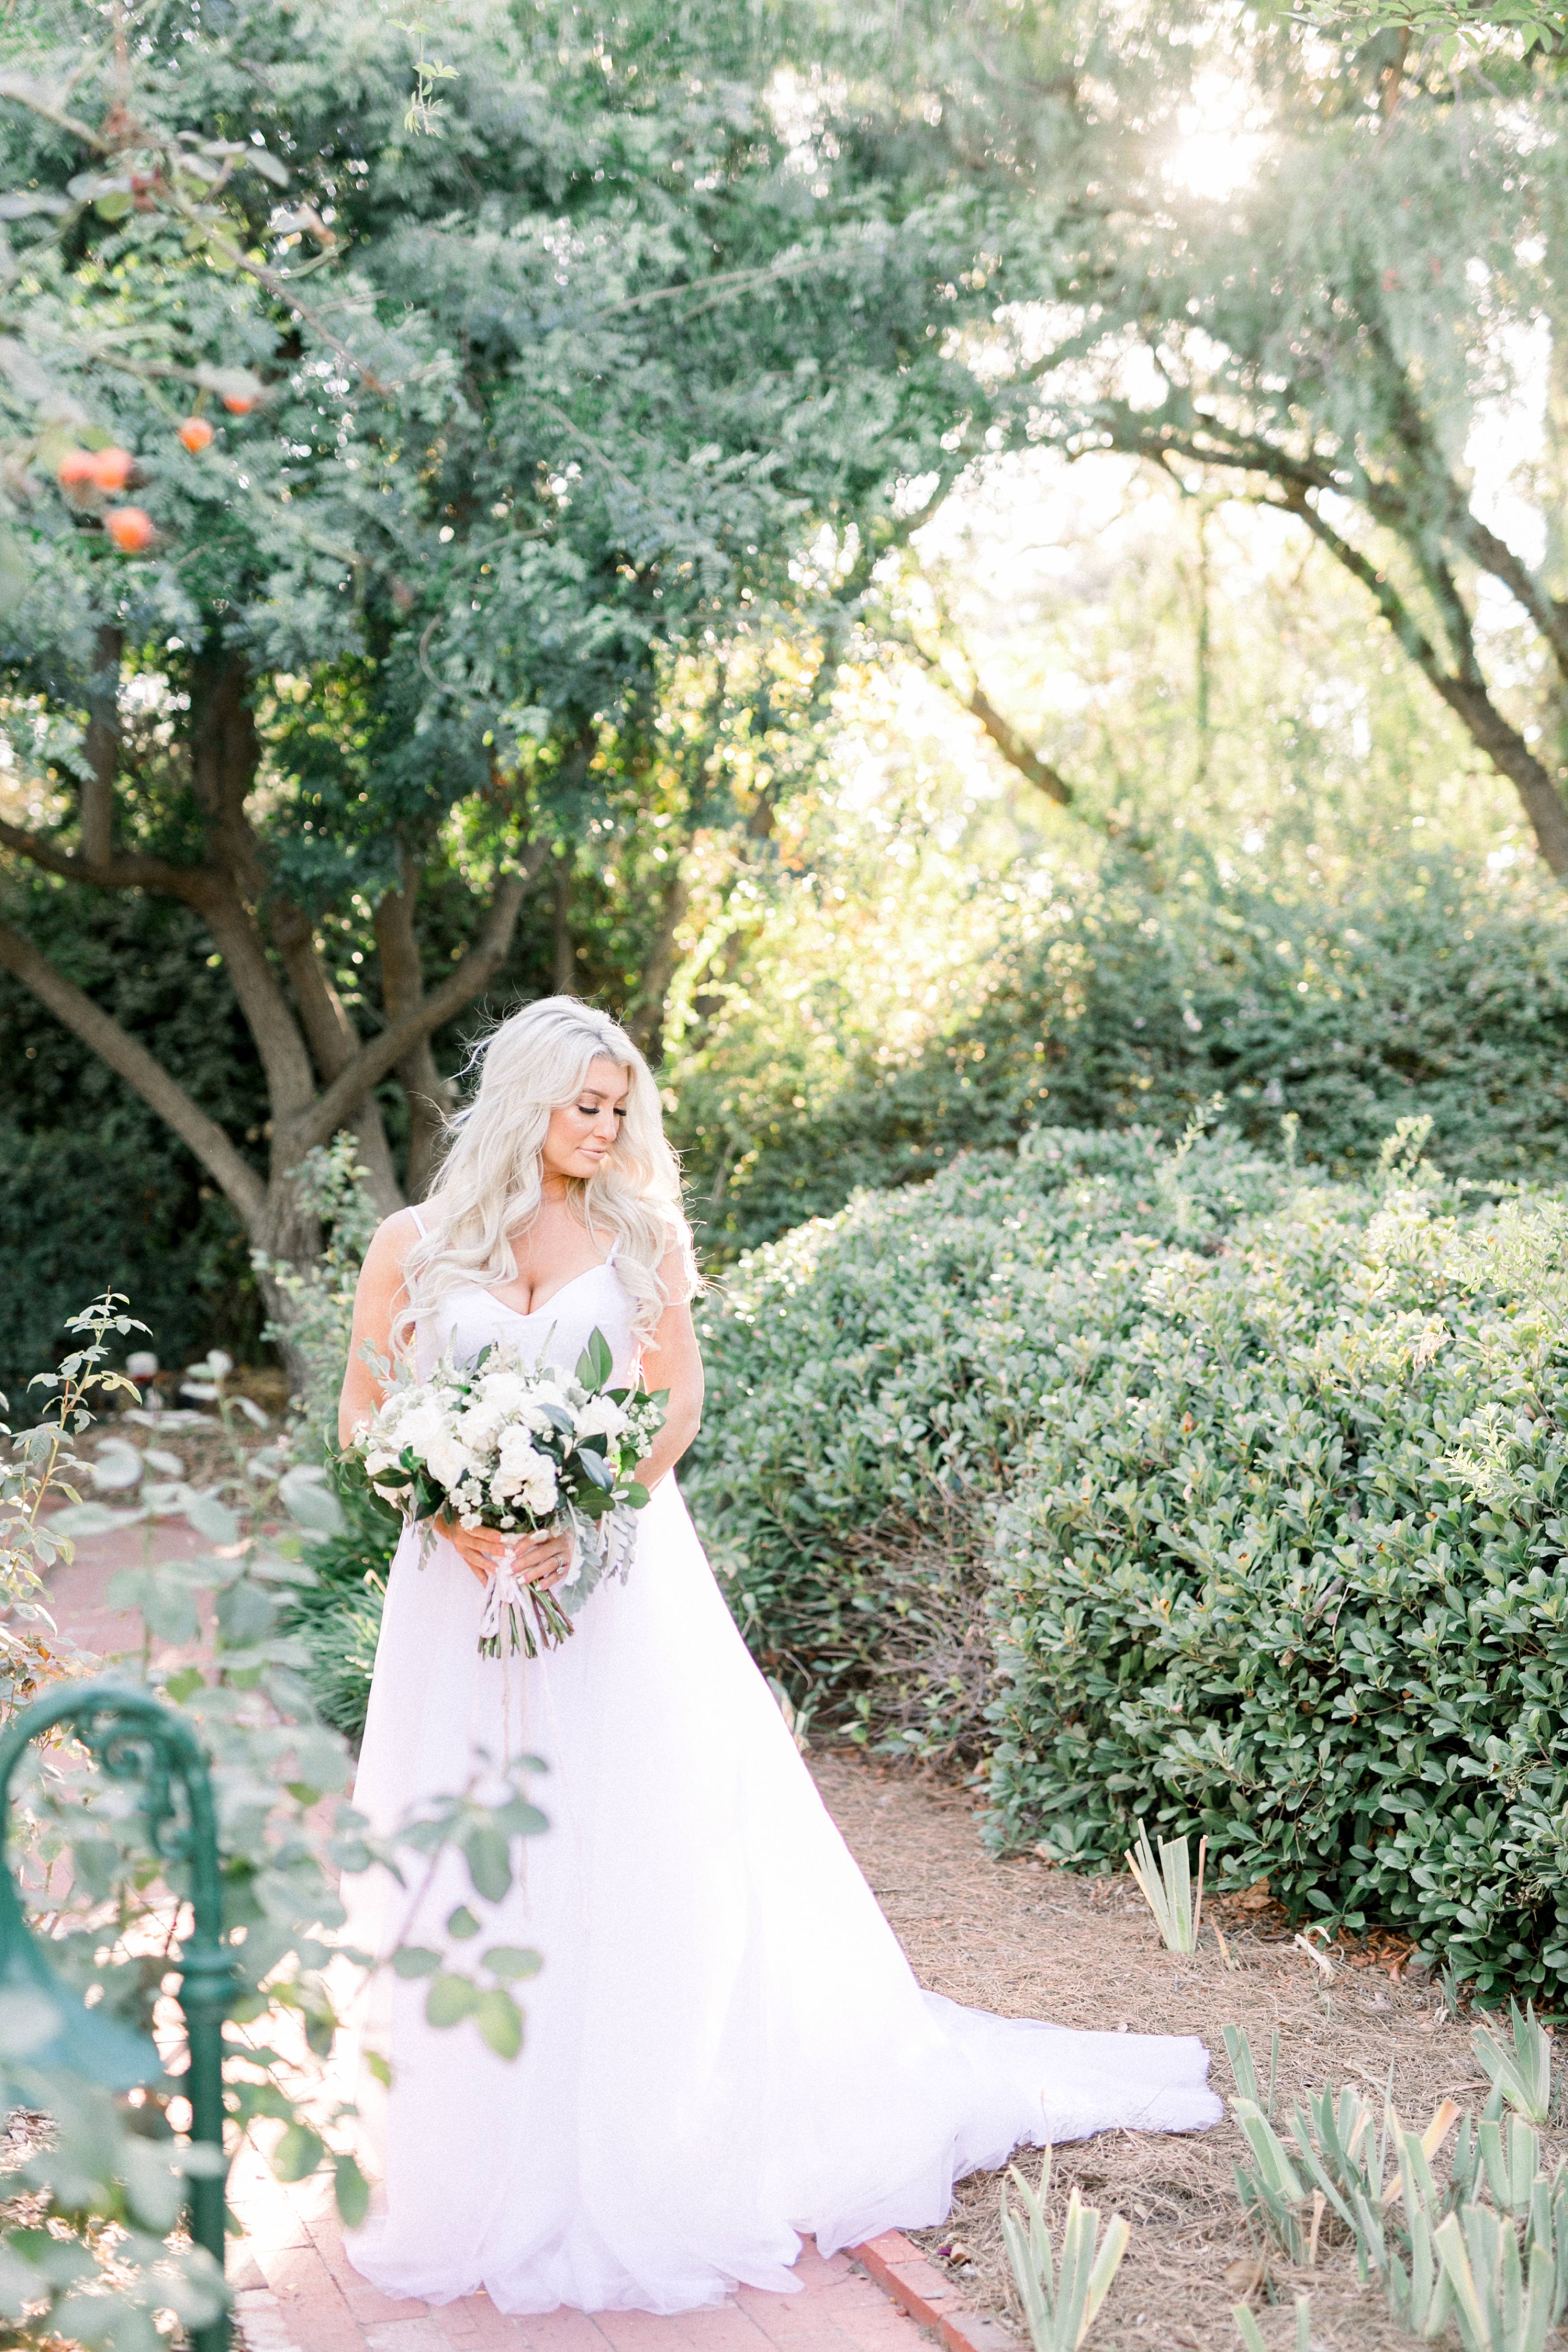 Beautiful blonde bride in the garden at temecula wedding venue captured by temecula wedding photographer carrie mcguire photography